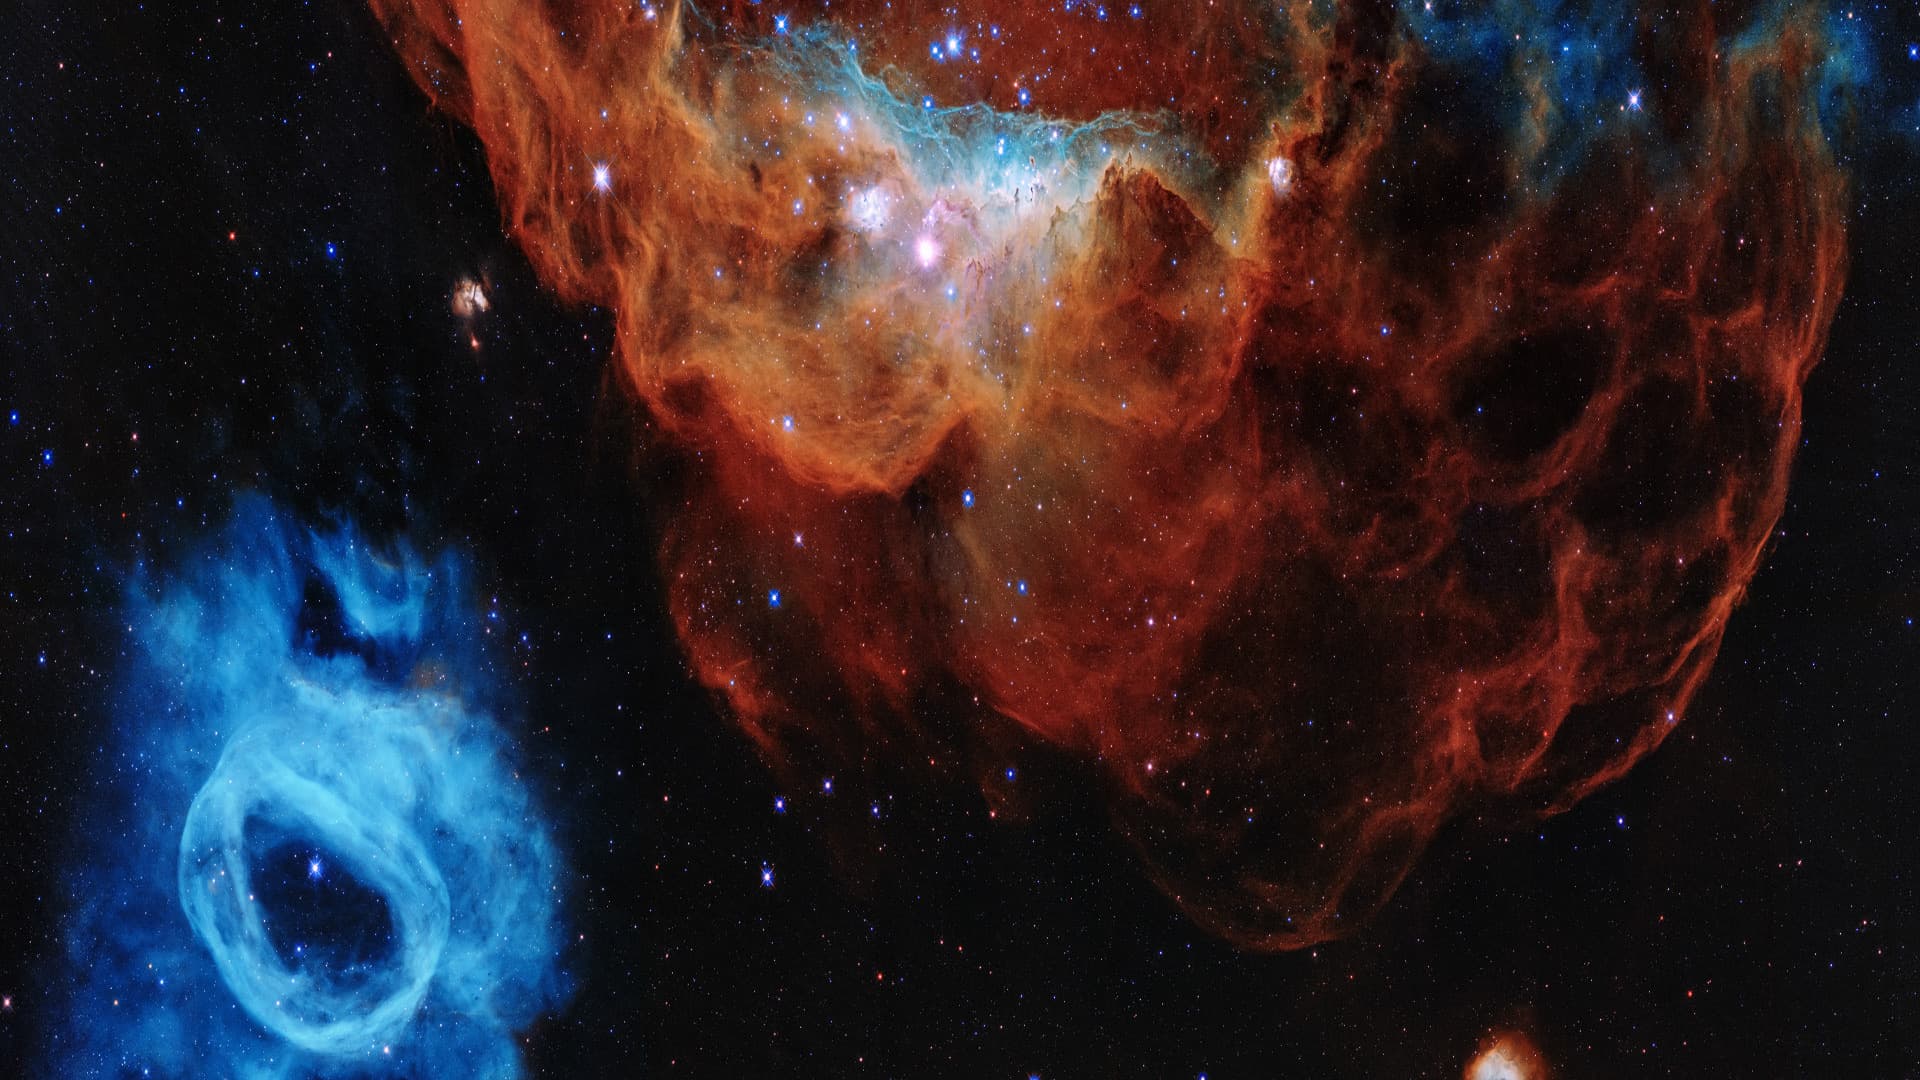 The stellar wind from energetic young stars sculpts the roiling red NGC2014 nebula in the Large Magellanic Cloud